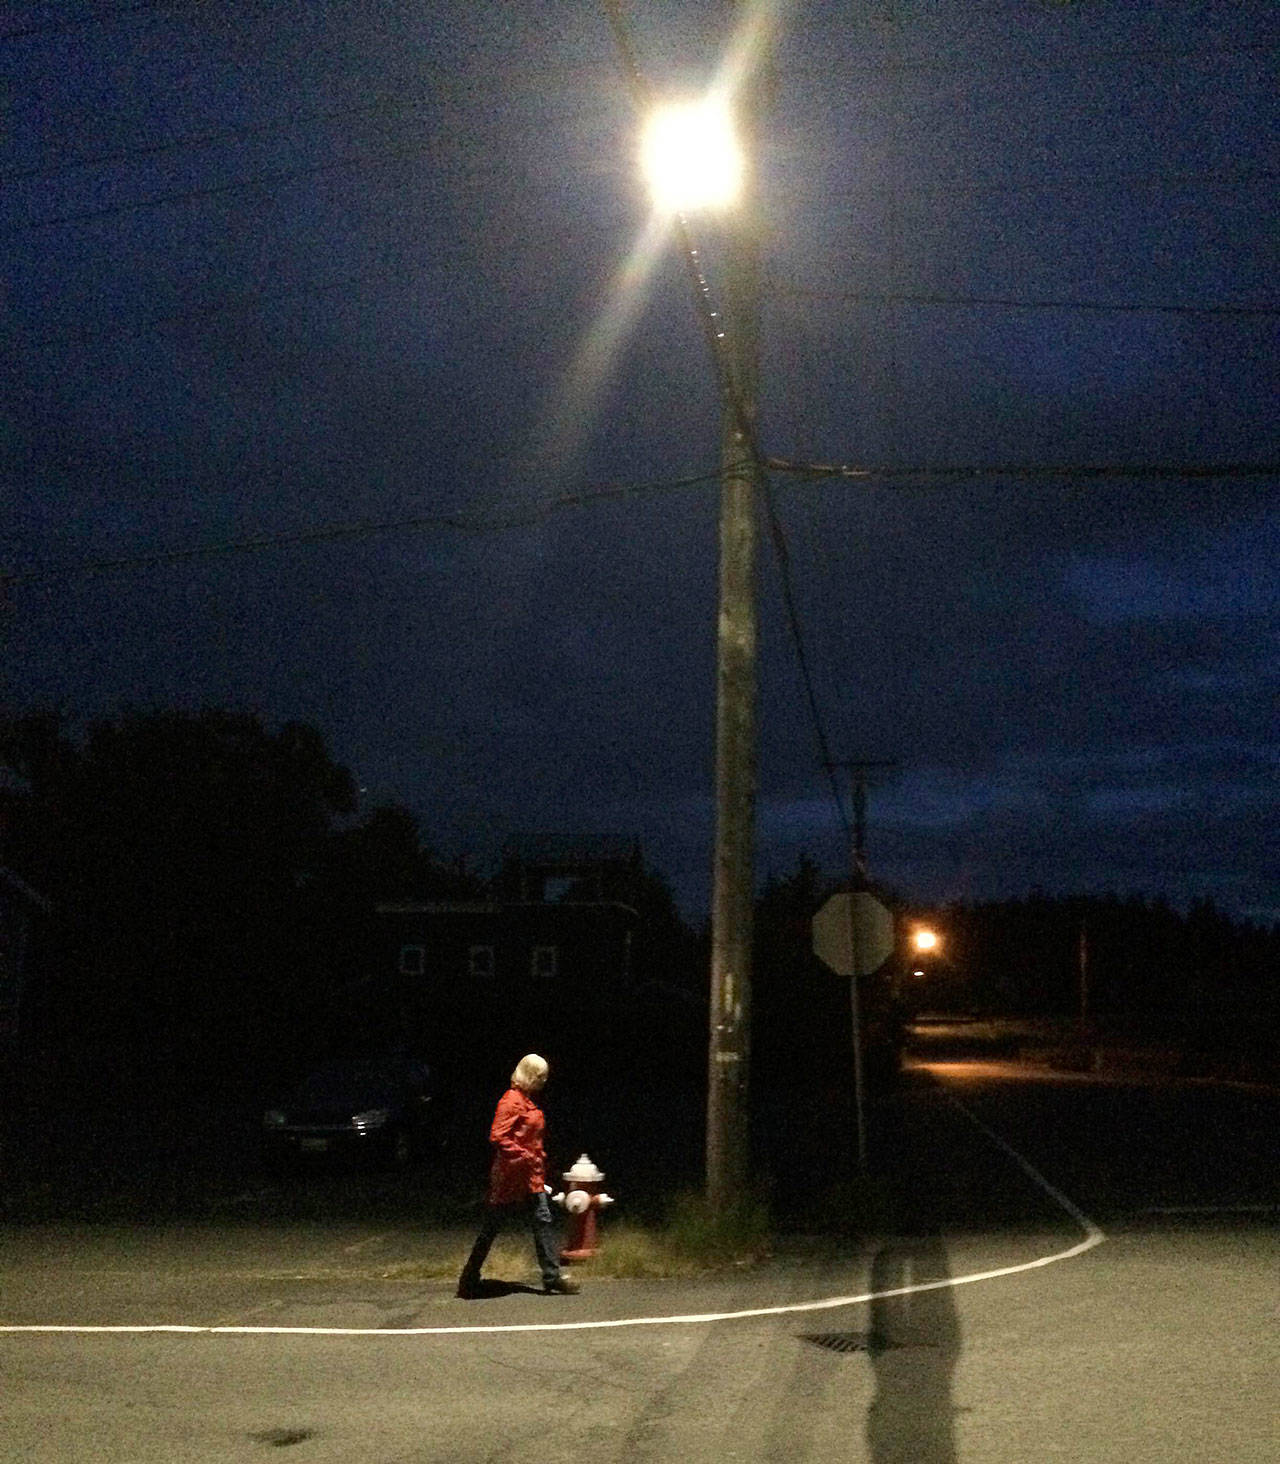 Record file — The City of Langley has been testing LED street lights for more than a year. In July 2016, residents complained about a 4,000 Kelvin bulb on Third Street and Park Avenue. The city is currently testing a 45-watt 3,000 Kelvin light at the same location.